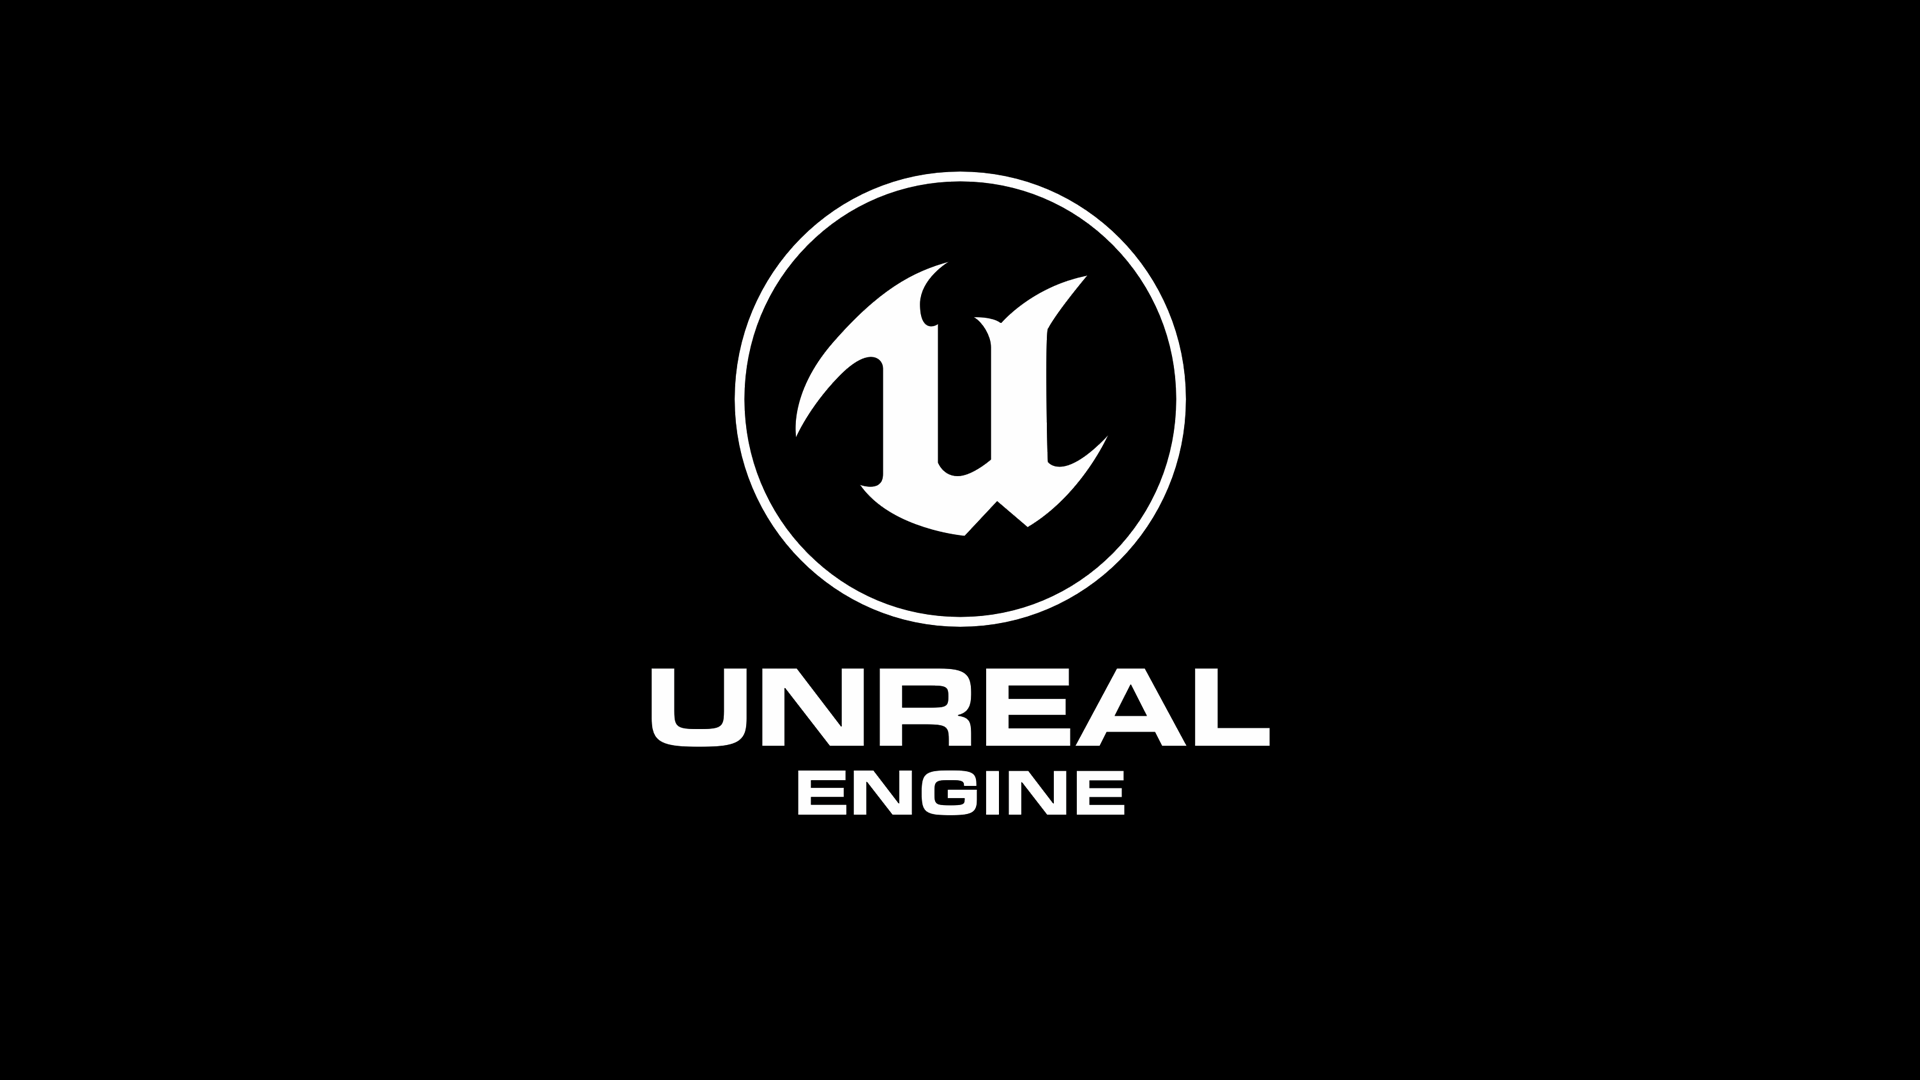 Unreal Engine is now royalty-free until a game makes a whopping $1